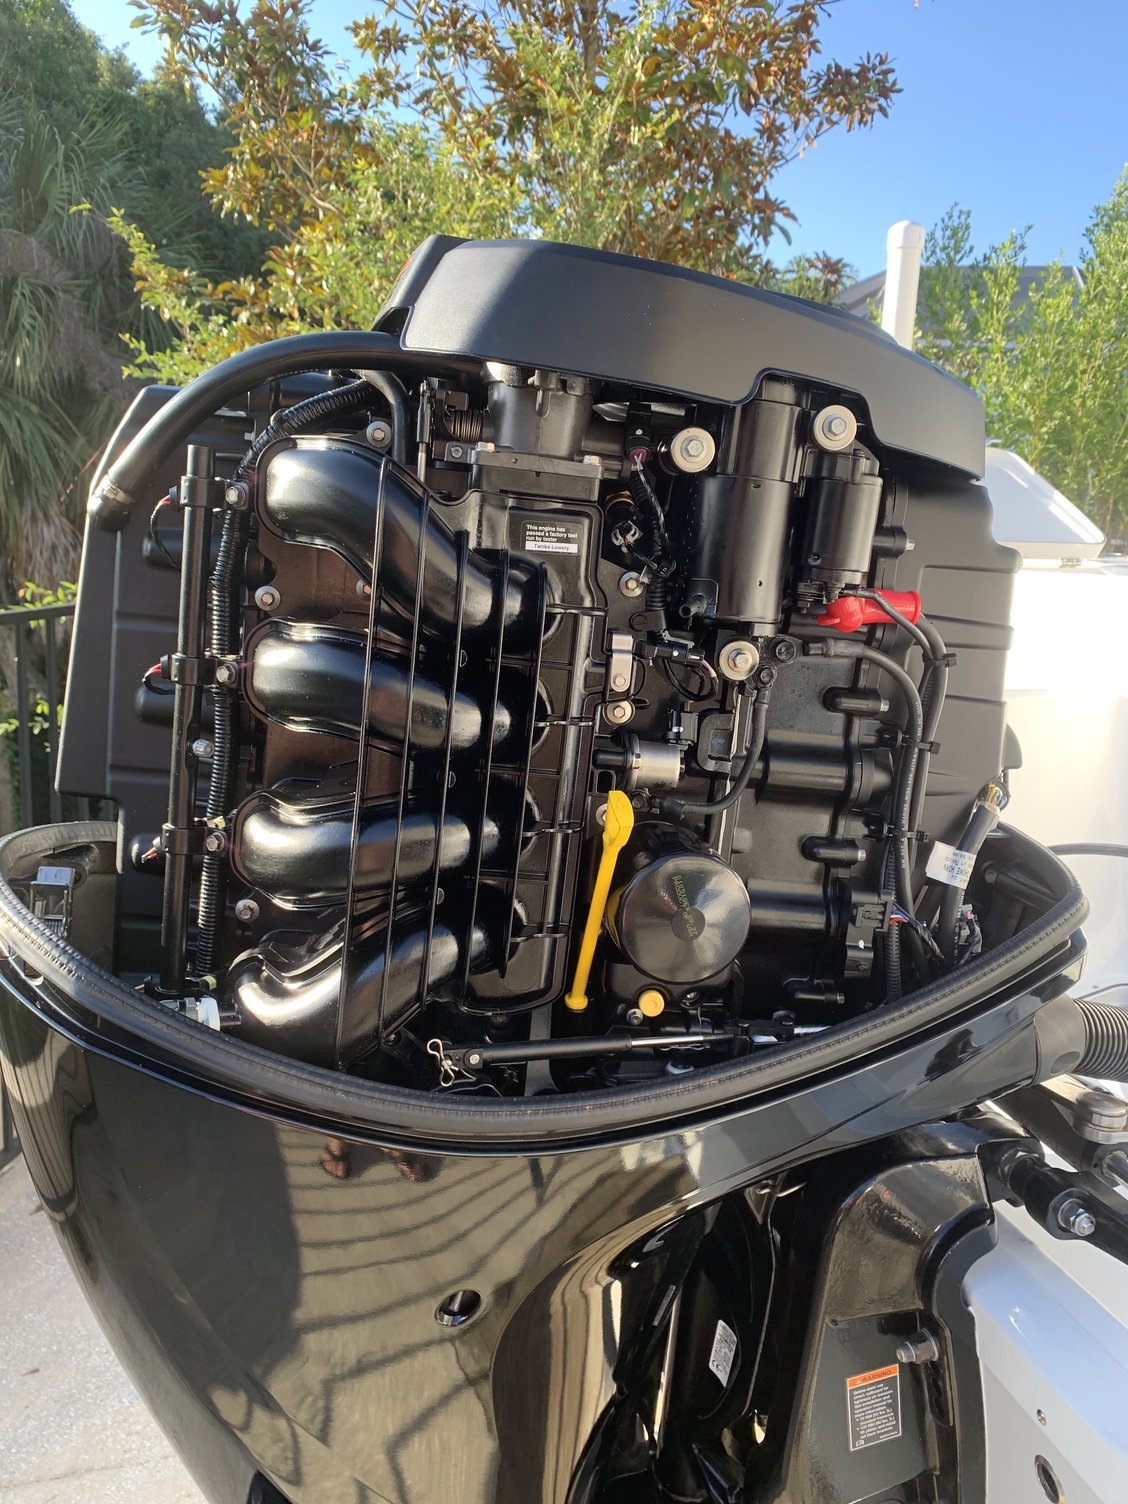 2018 Mercury 150 HP XL 4 stroke outboard For Sale The Hull Truth